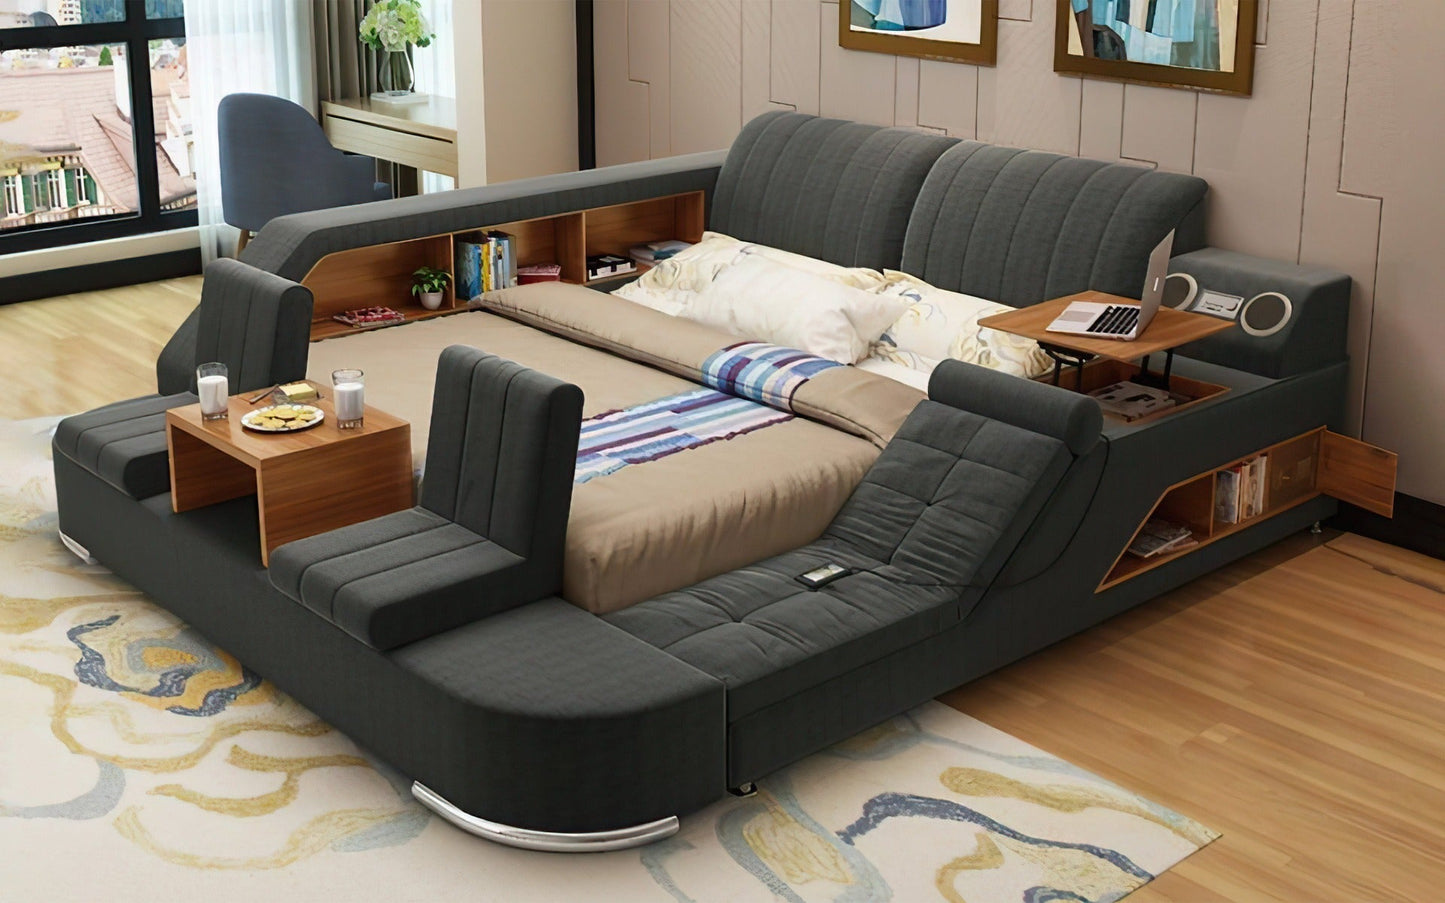 Multifunctional Smart Bed | Ultimate Bed